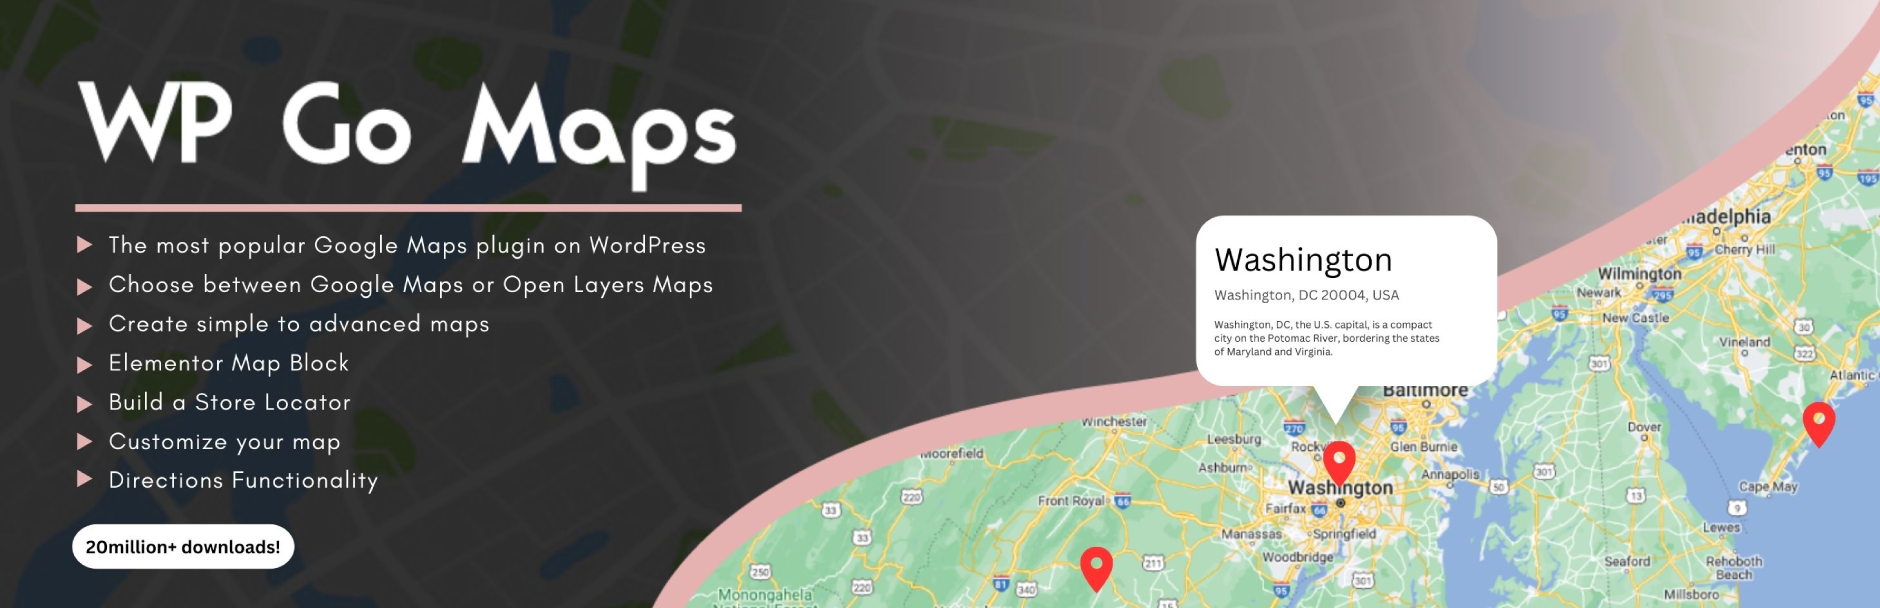 WP Go Maps (formerly WP Google Maps) Preview Wordpress Plugin - Rating, Reviews, Demo & Download